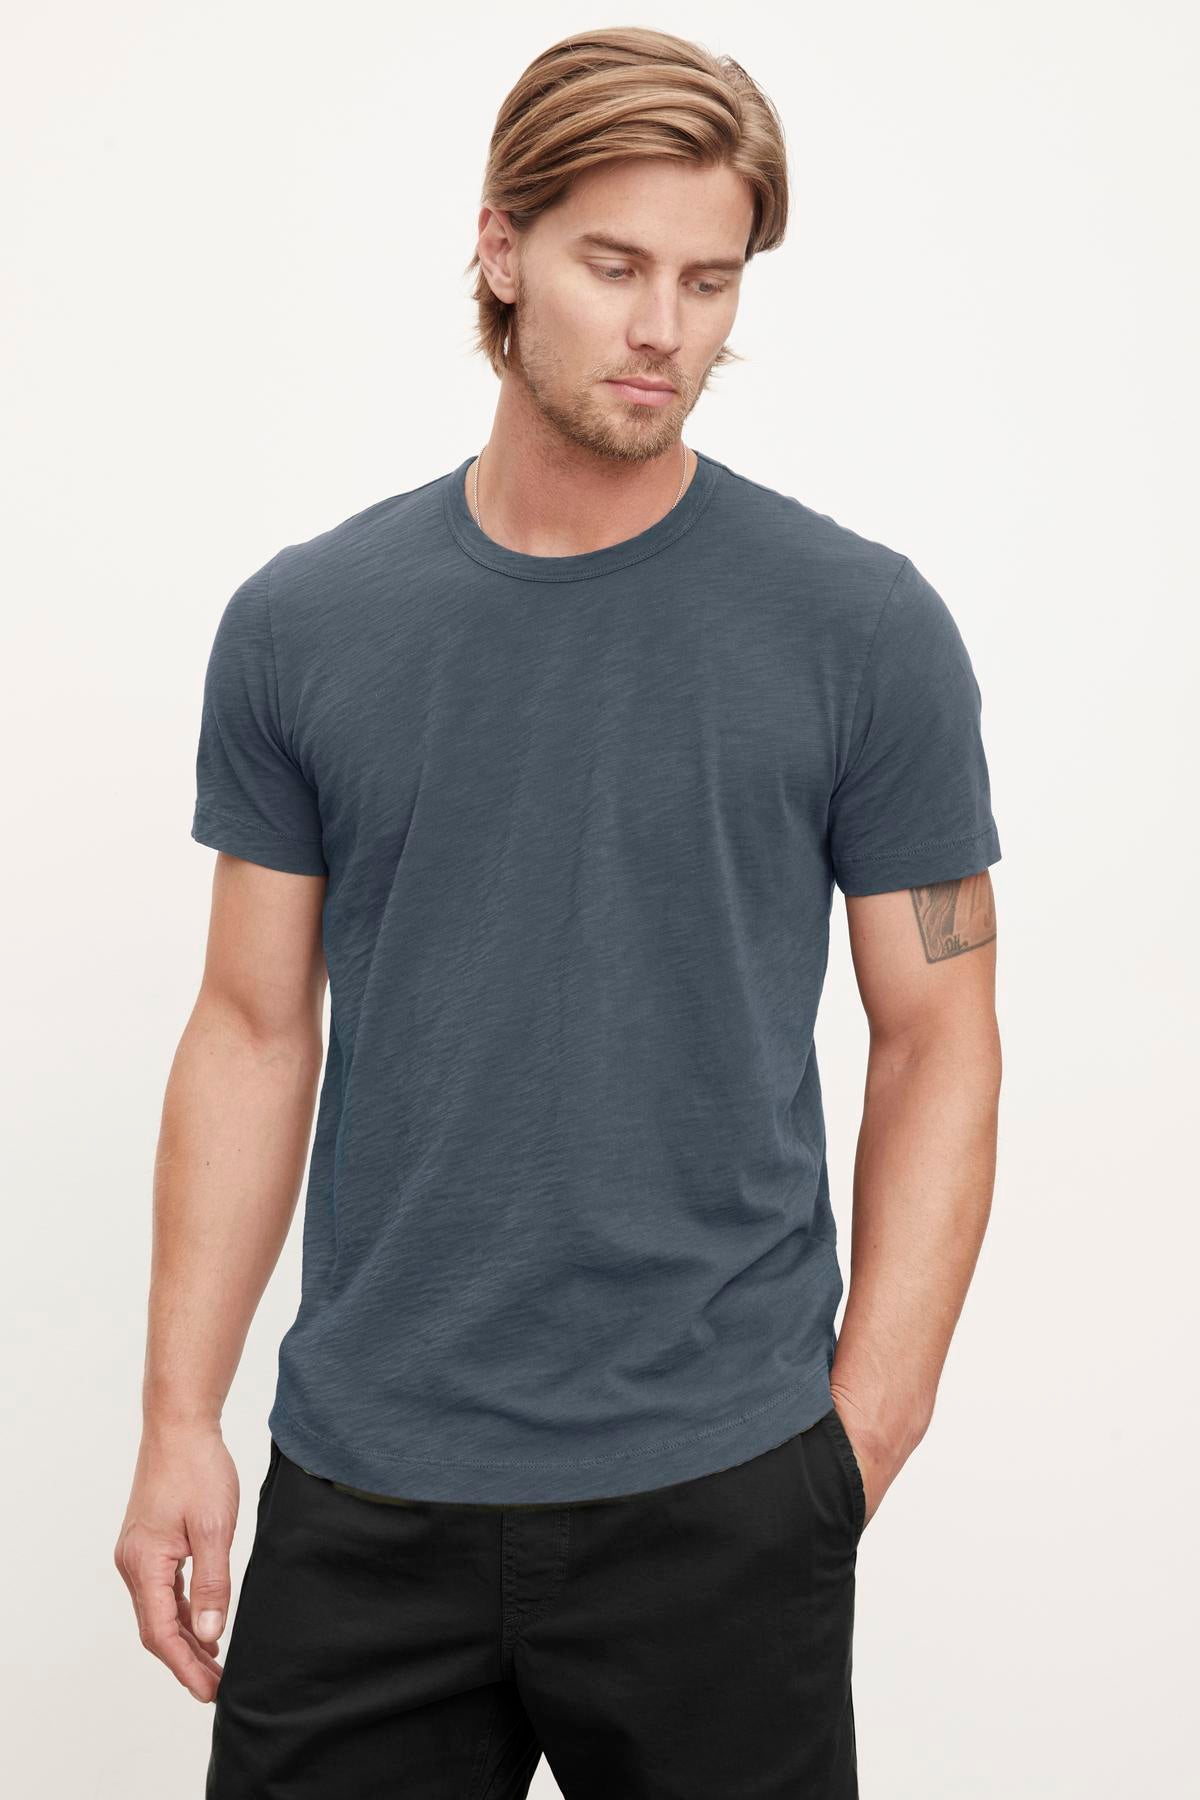 A person with long hair wearing a relaxed stylish feel, casual, short-sleeved dark gray Velvet by Graham & Spencer AMARO TEE and black pants stands against a plain light background. They have a neutral expression and a tattoo on their left arm.-37386214375617